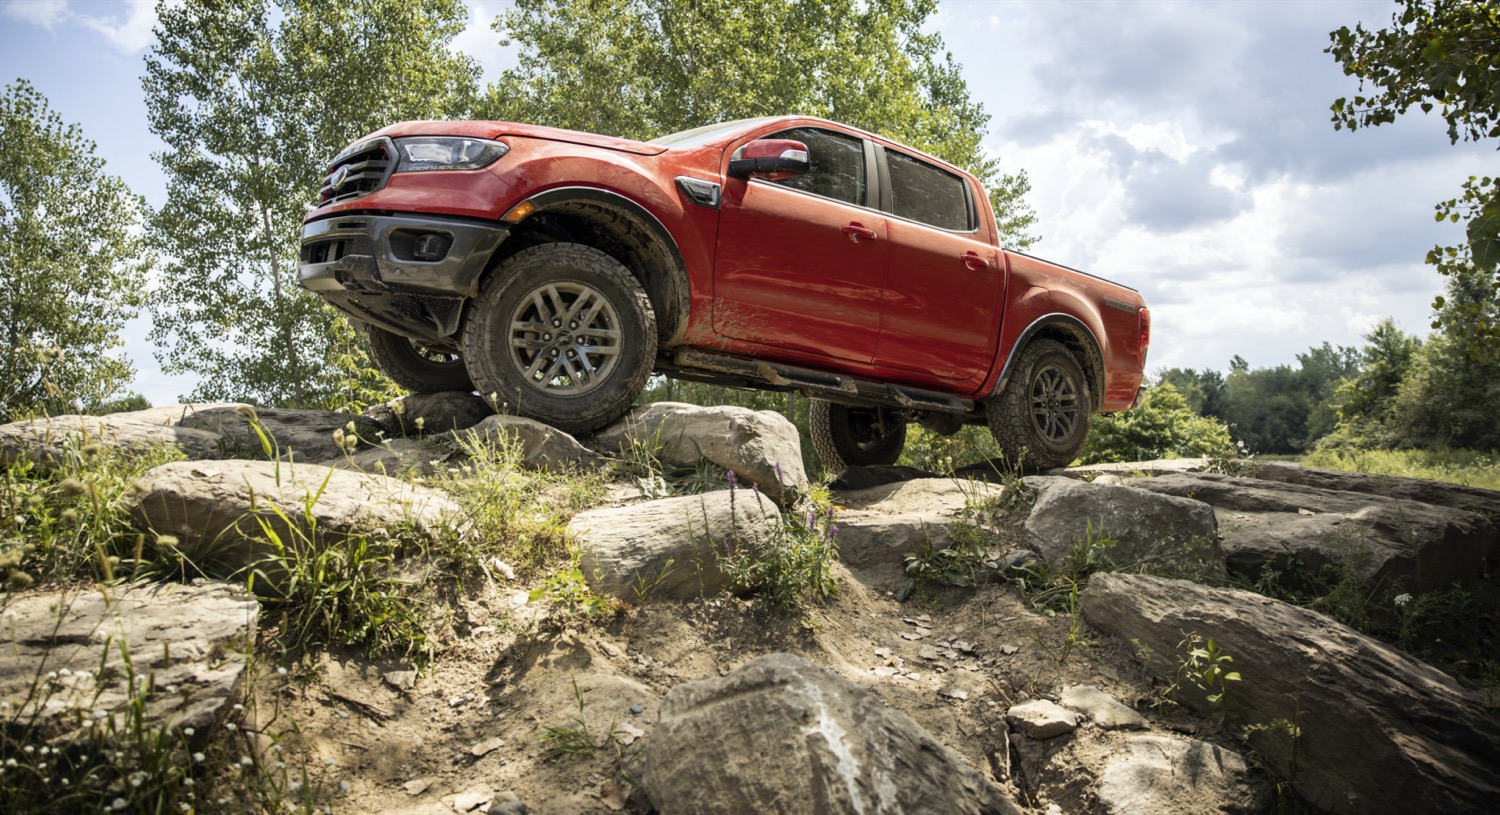 ford-ranger-incentive-offers-up-to-3-9-percent-apr-in-september-2022